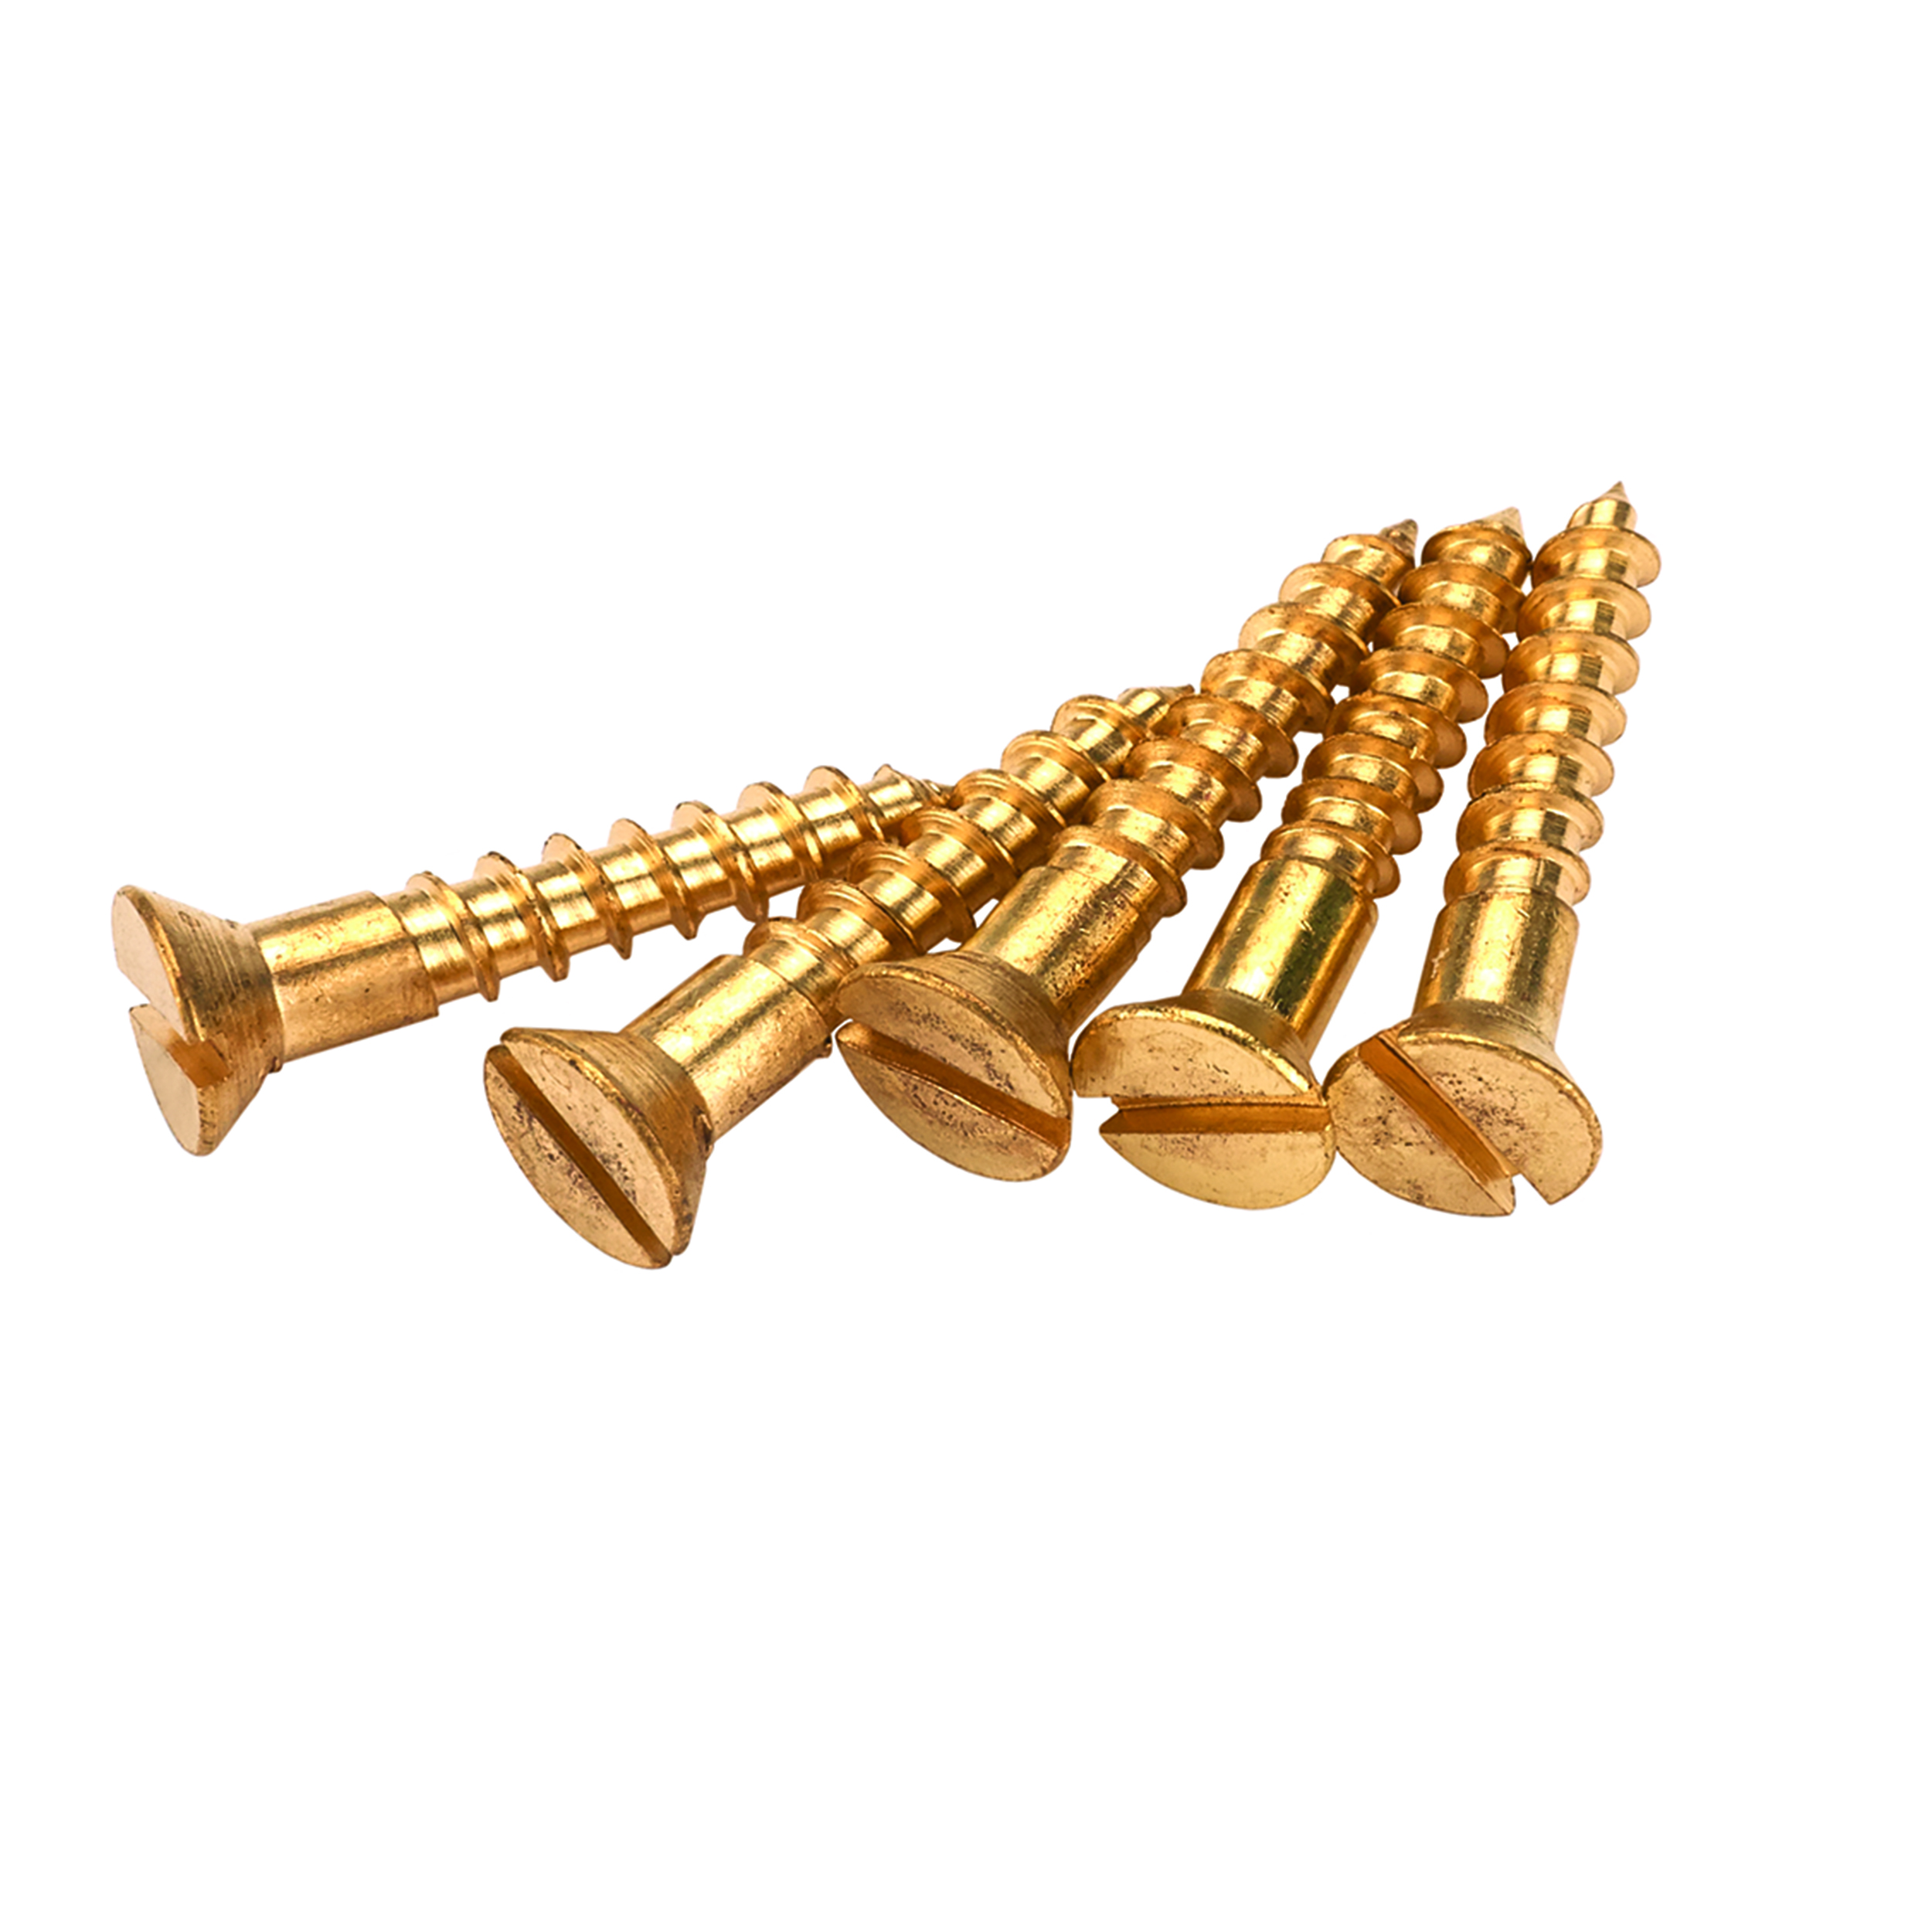 Solid Brass Screws #5 X 5/8" Slotted 25-piece